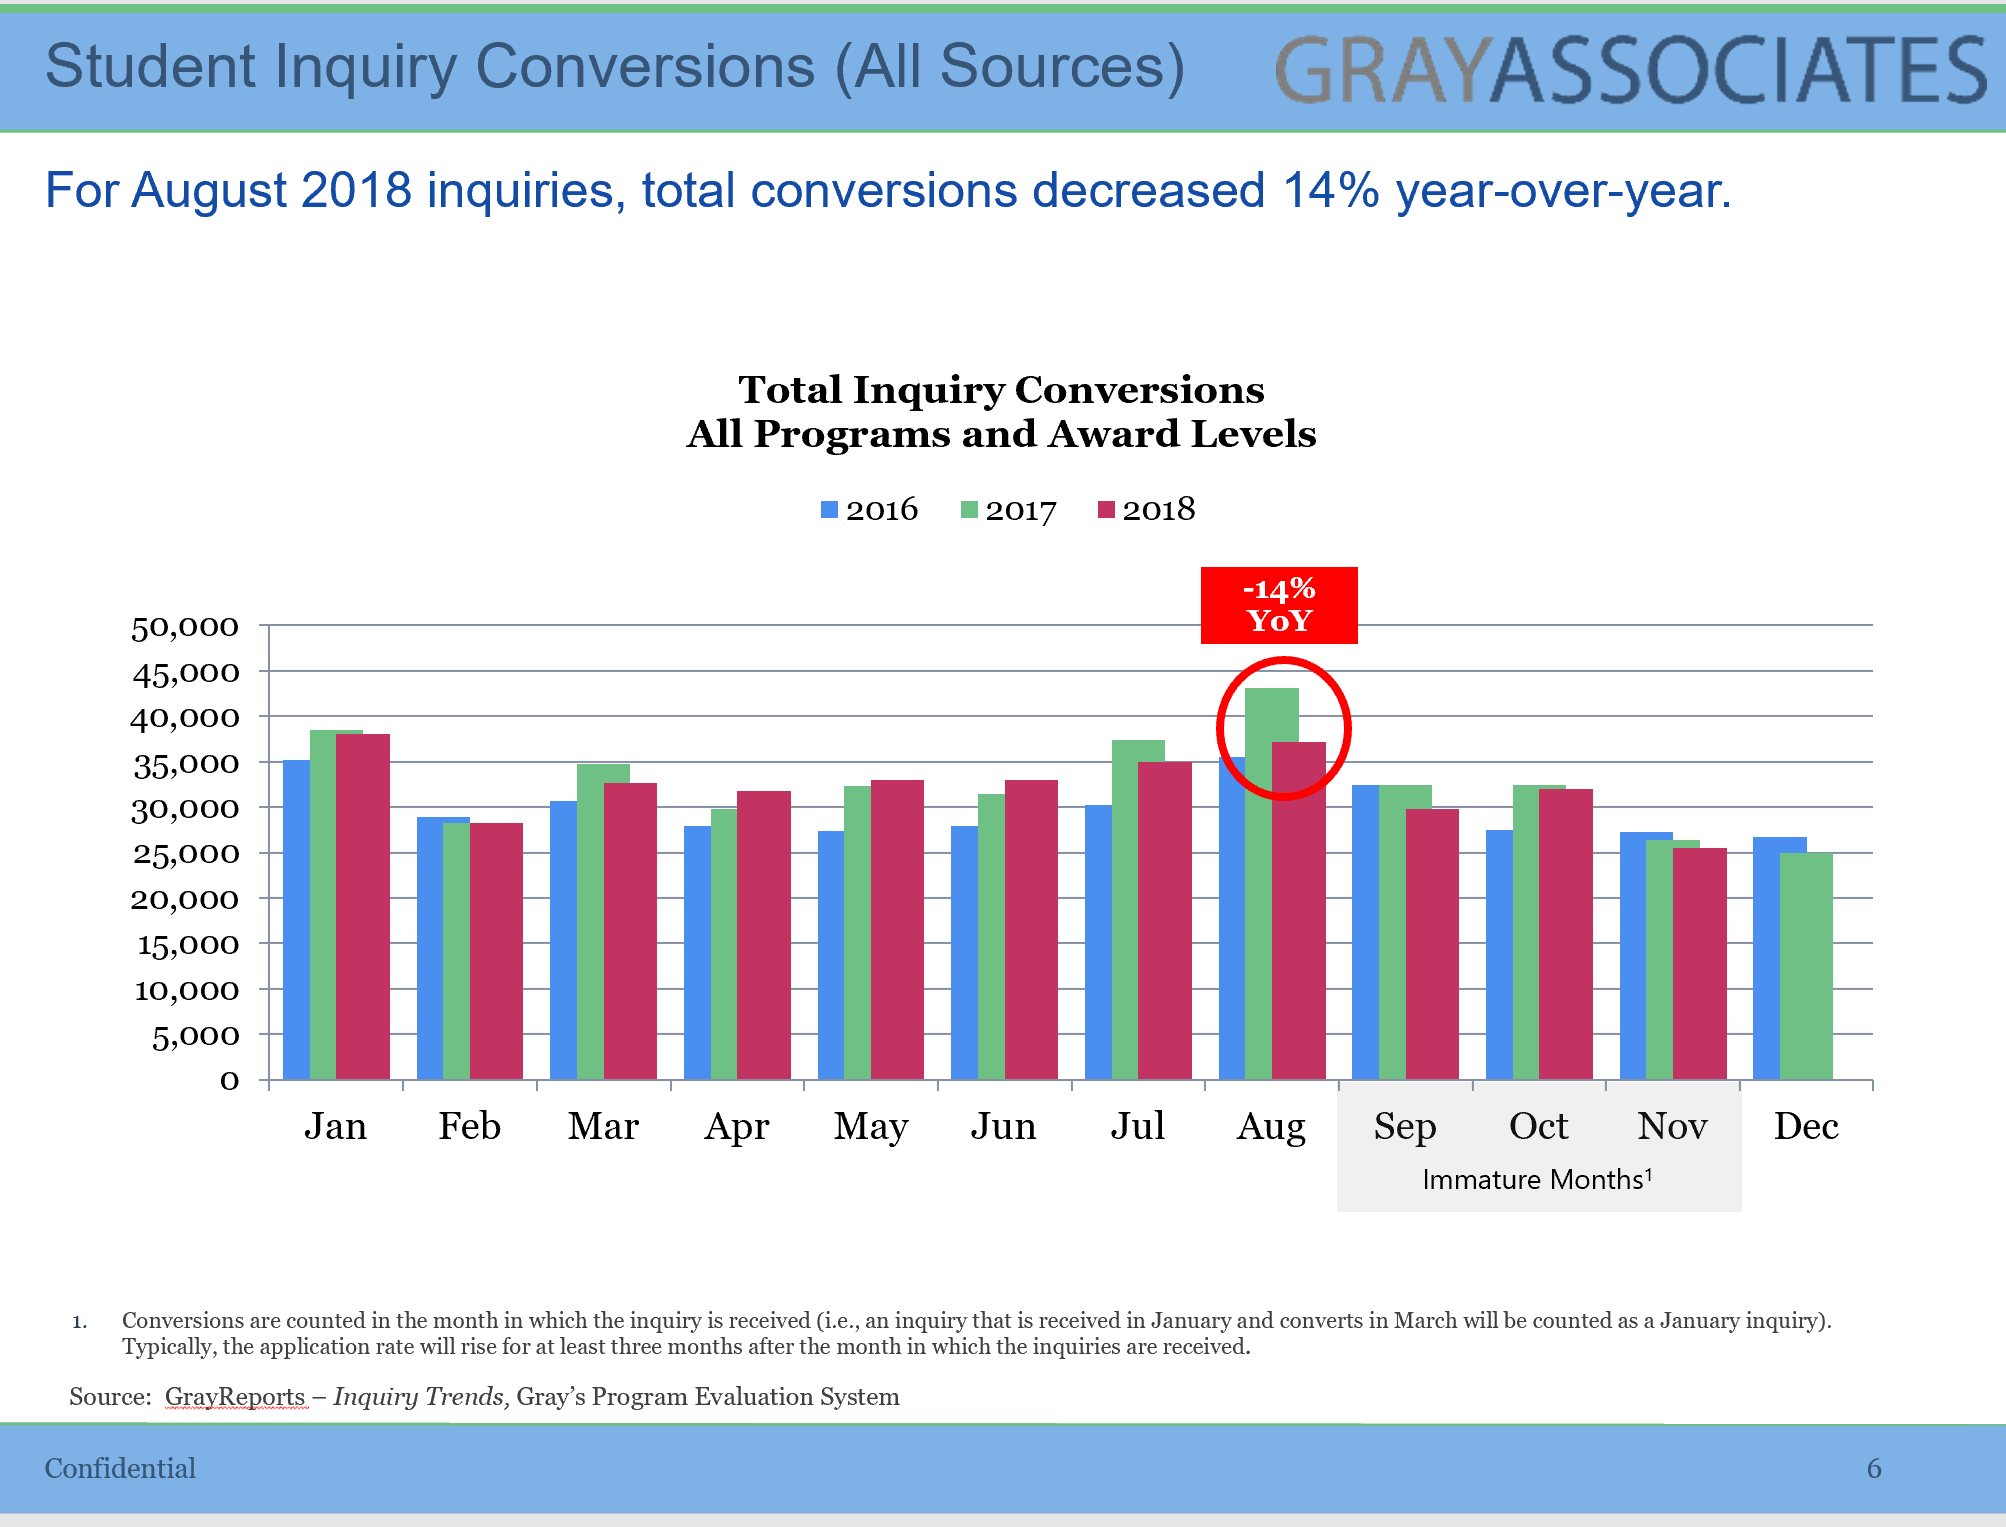 Sudden Drop in Conversion Rates for Student Inquiries Nov18